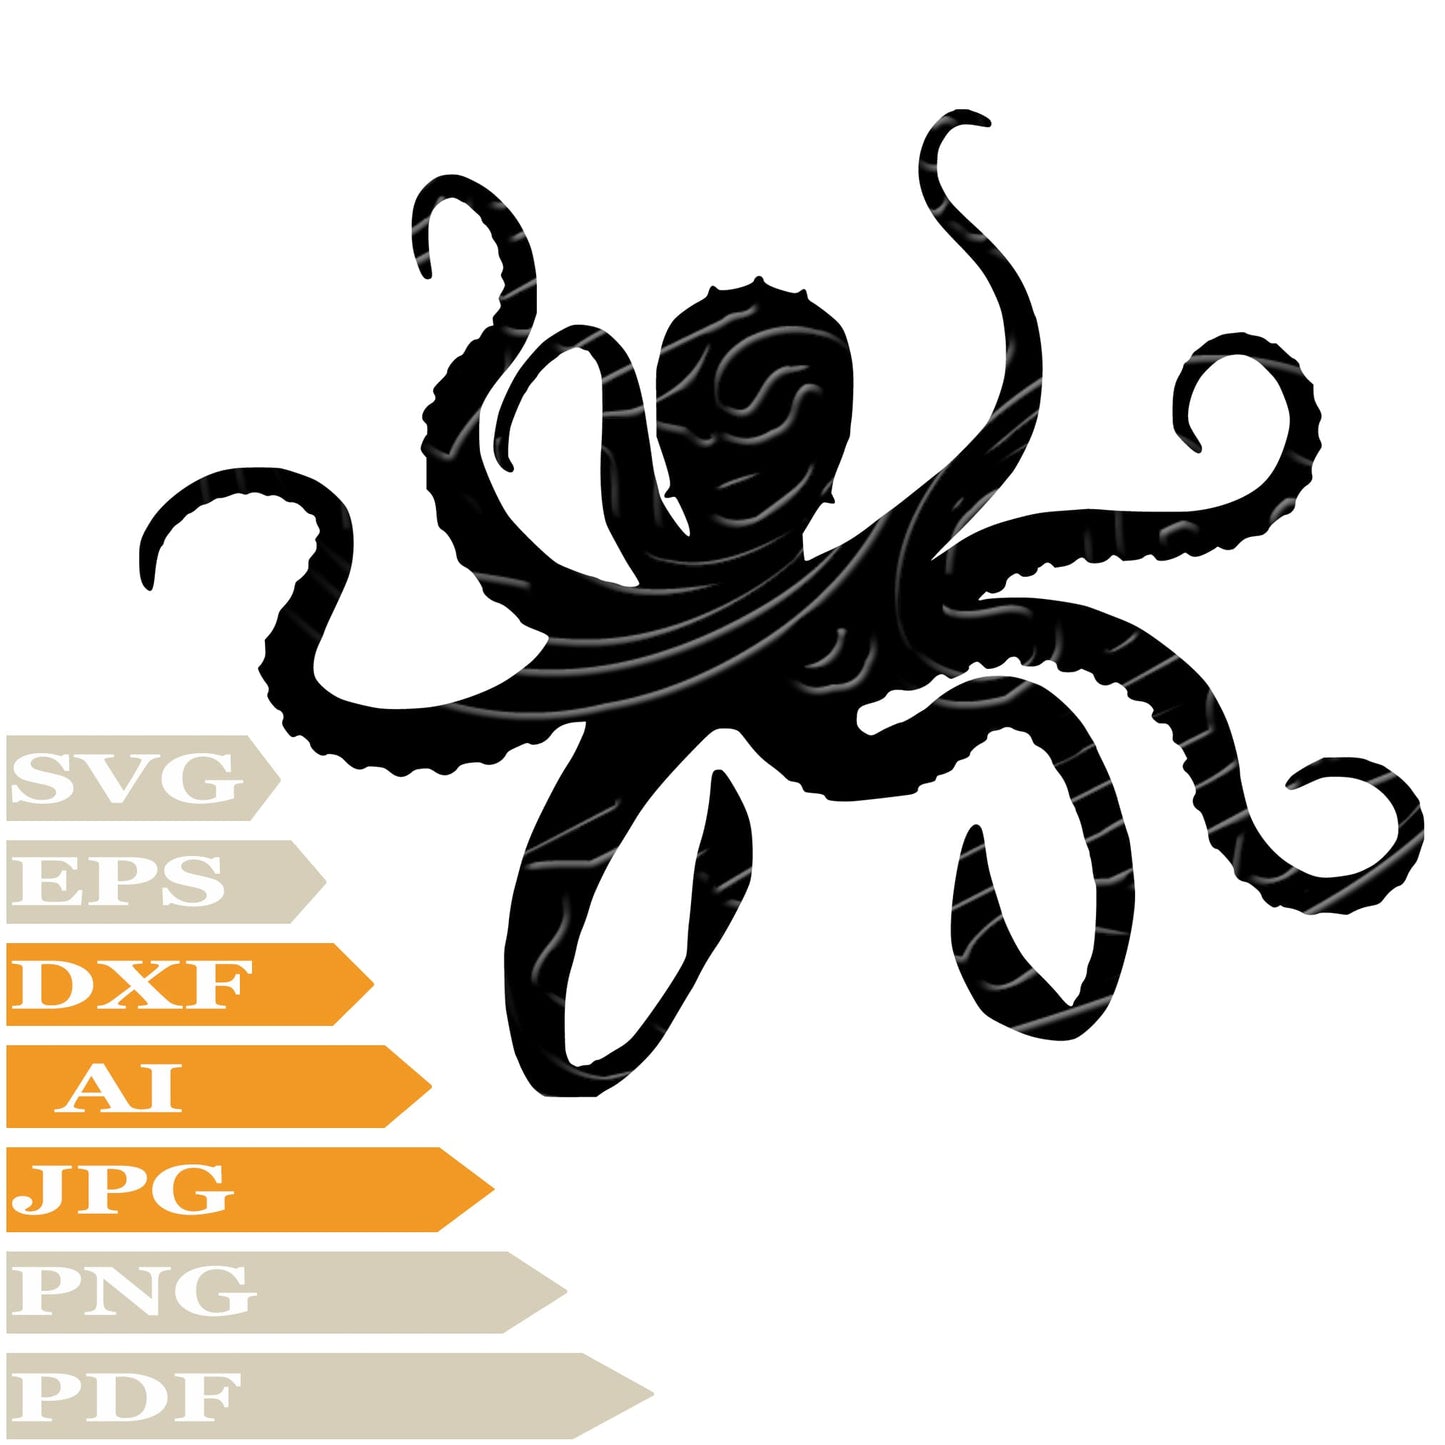 Octopus Svg File, Image Cut, Png, For Tattoo, Silhouette, Digital Vector Download, Cut File, Clipart, For Cricut